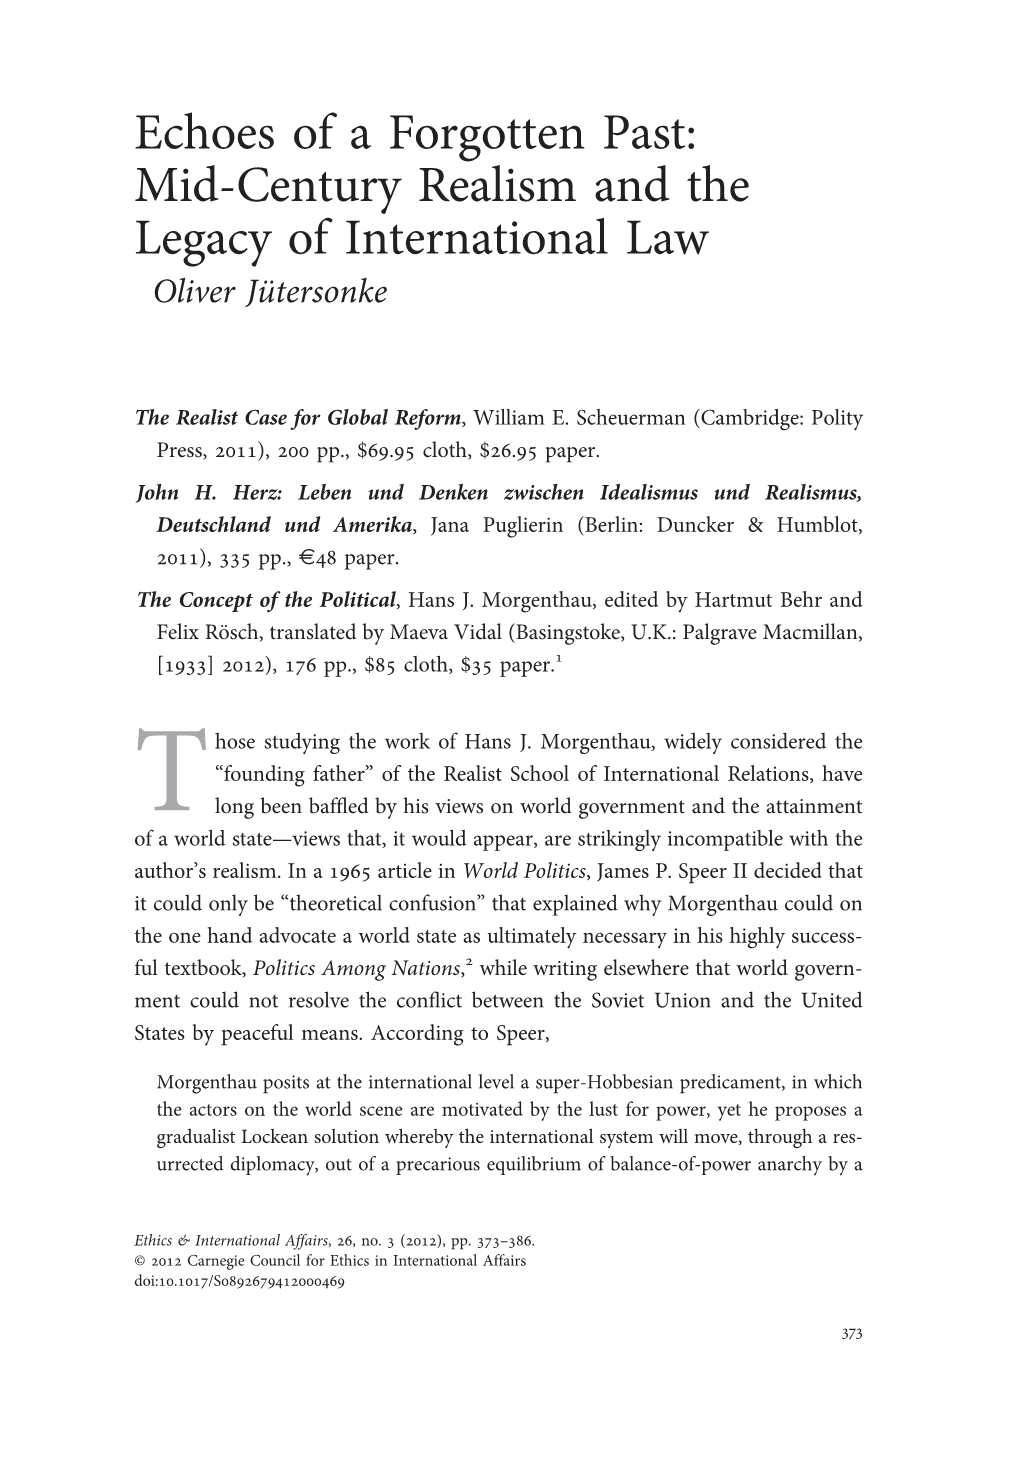 Mid-Century Realism and the Legacy of International Law Oliver Jütersonke